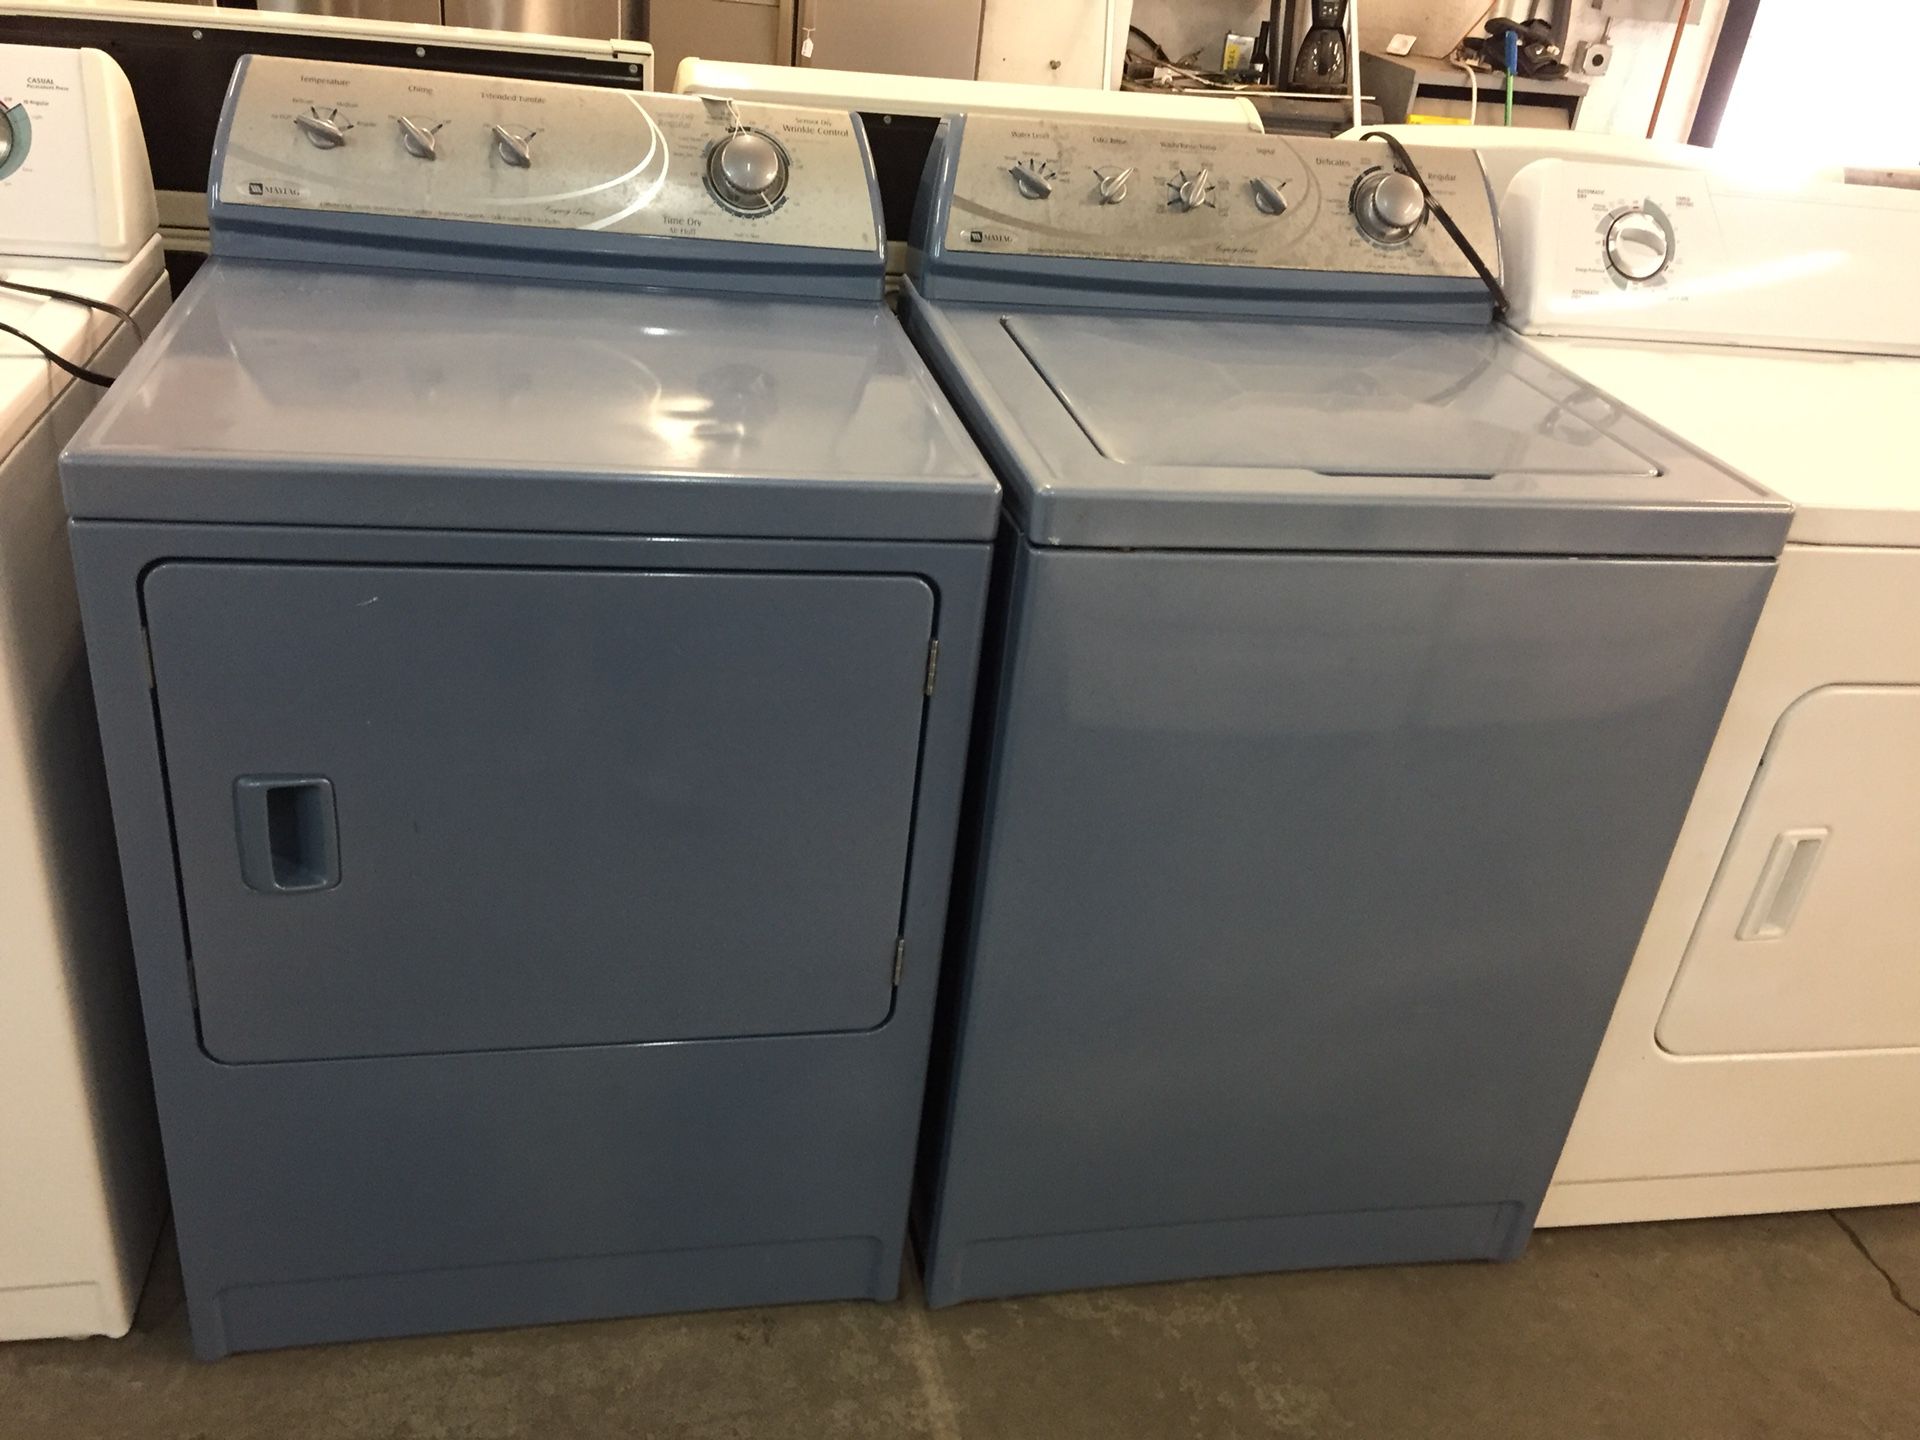 Maytag blue washer and dryer set